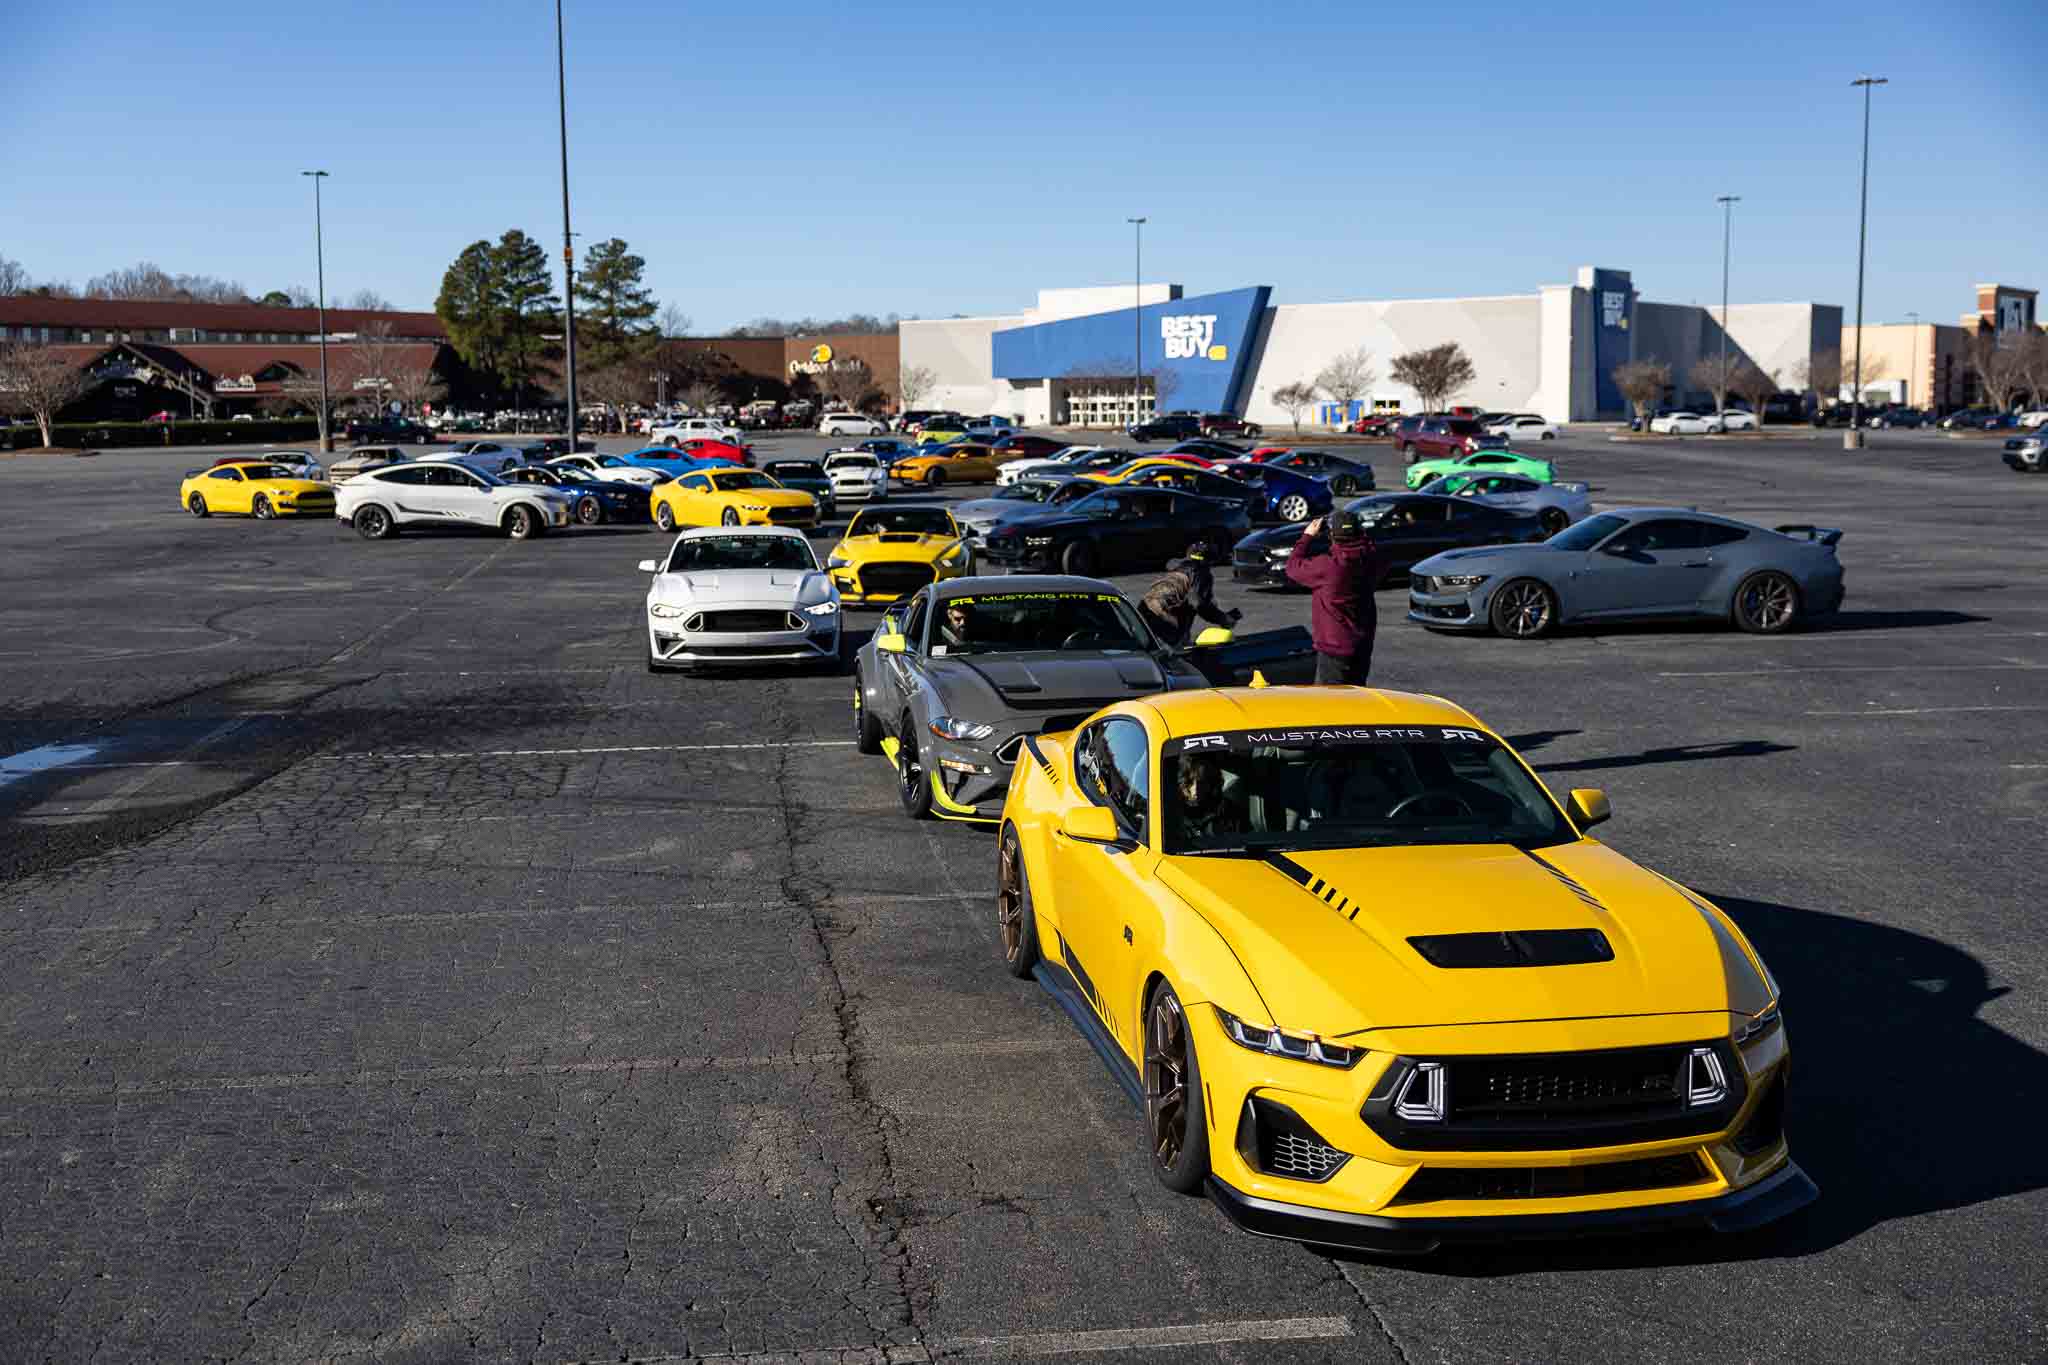 Mustang owners line up for the start of the cruise